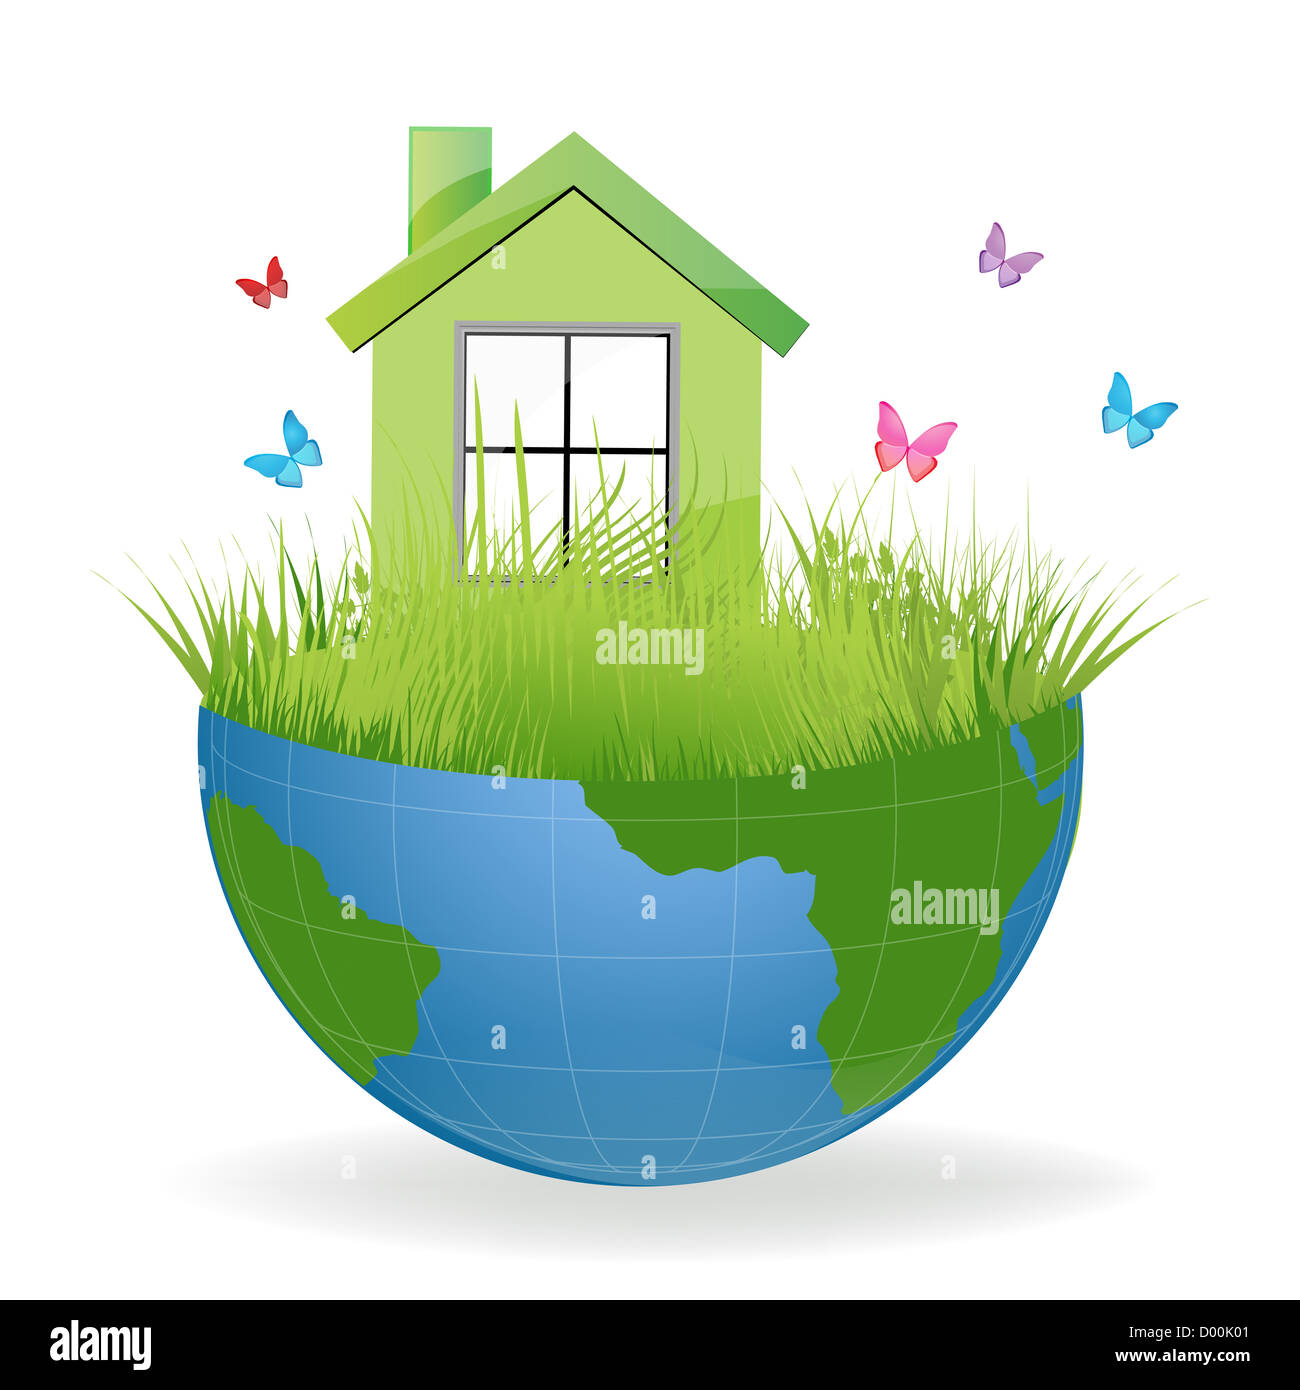 illustration of green house on half earth with colorful butterflies Stock Photo